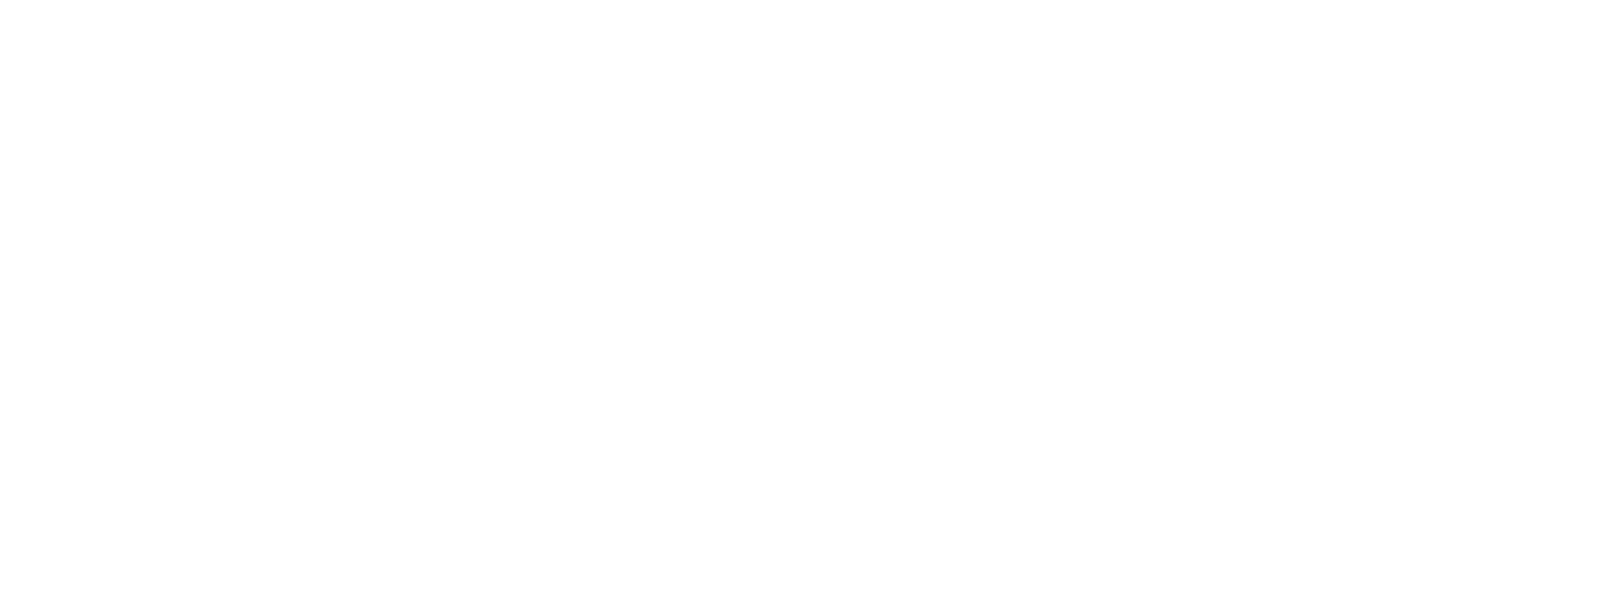 Halozyme Therapeutics logo large for dark backgrounds (transparent PNG)